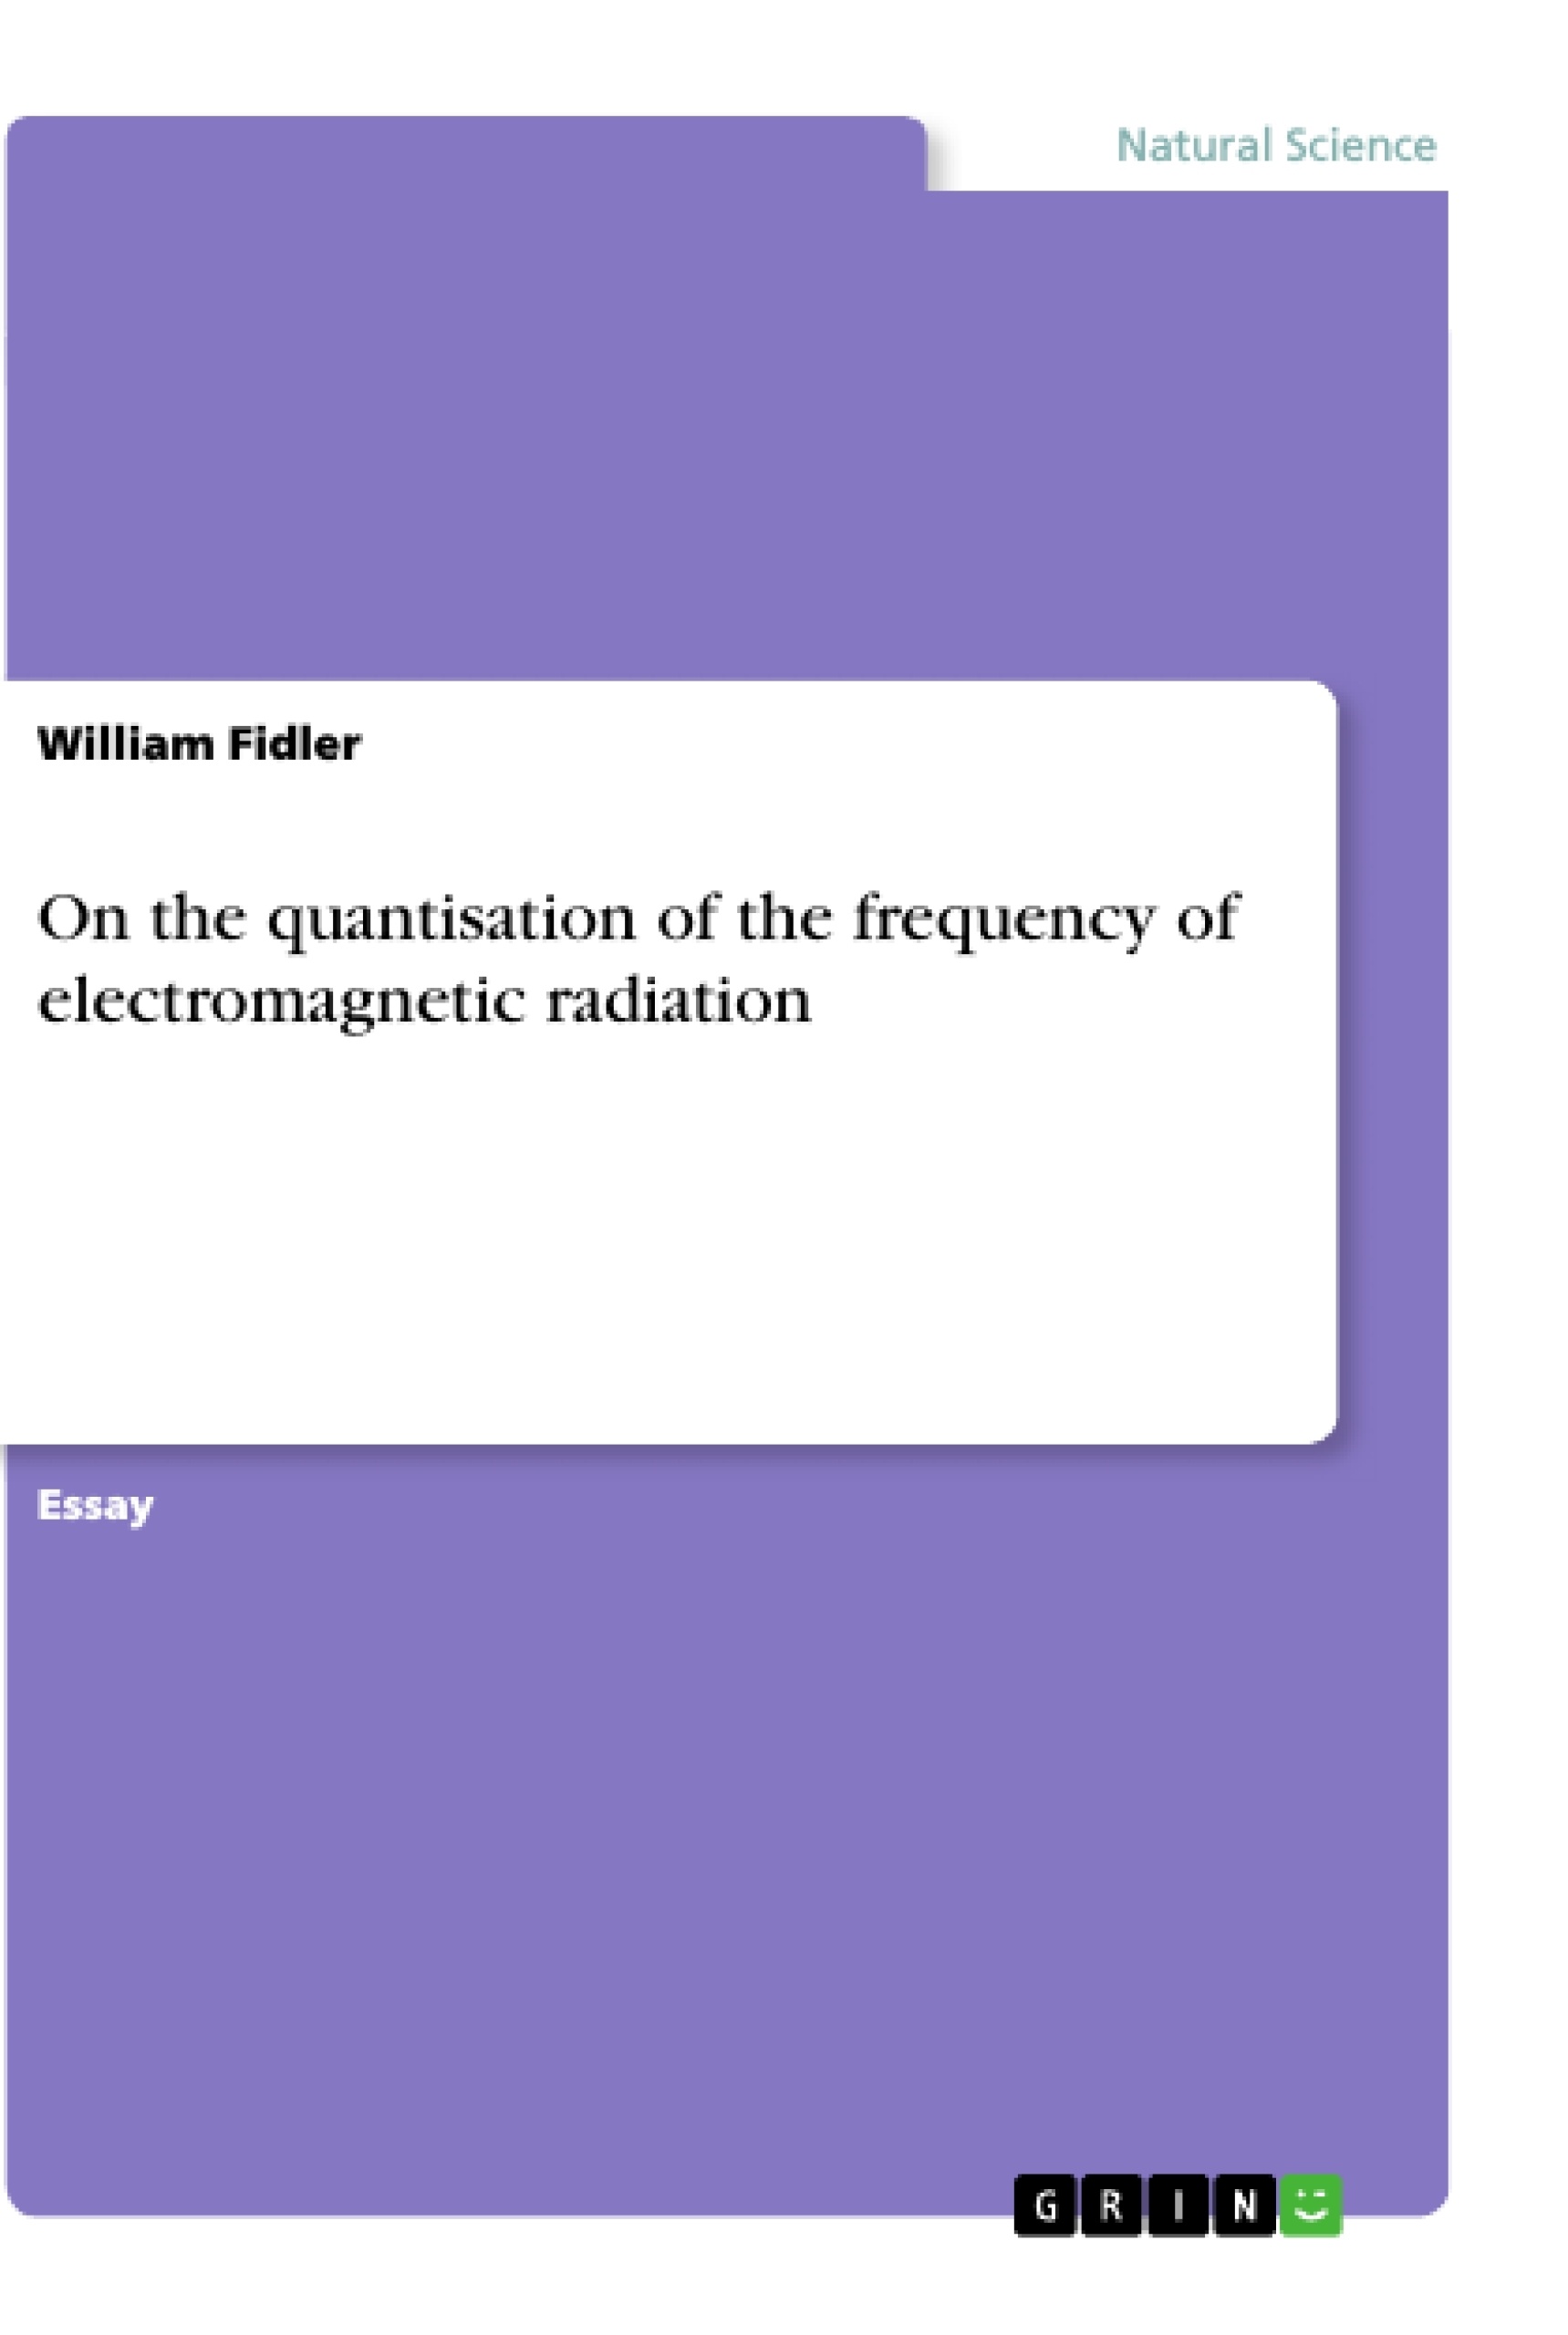 Title: On the quantisation of the frequency of electromagnetic radiation